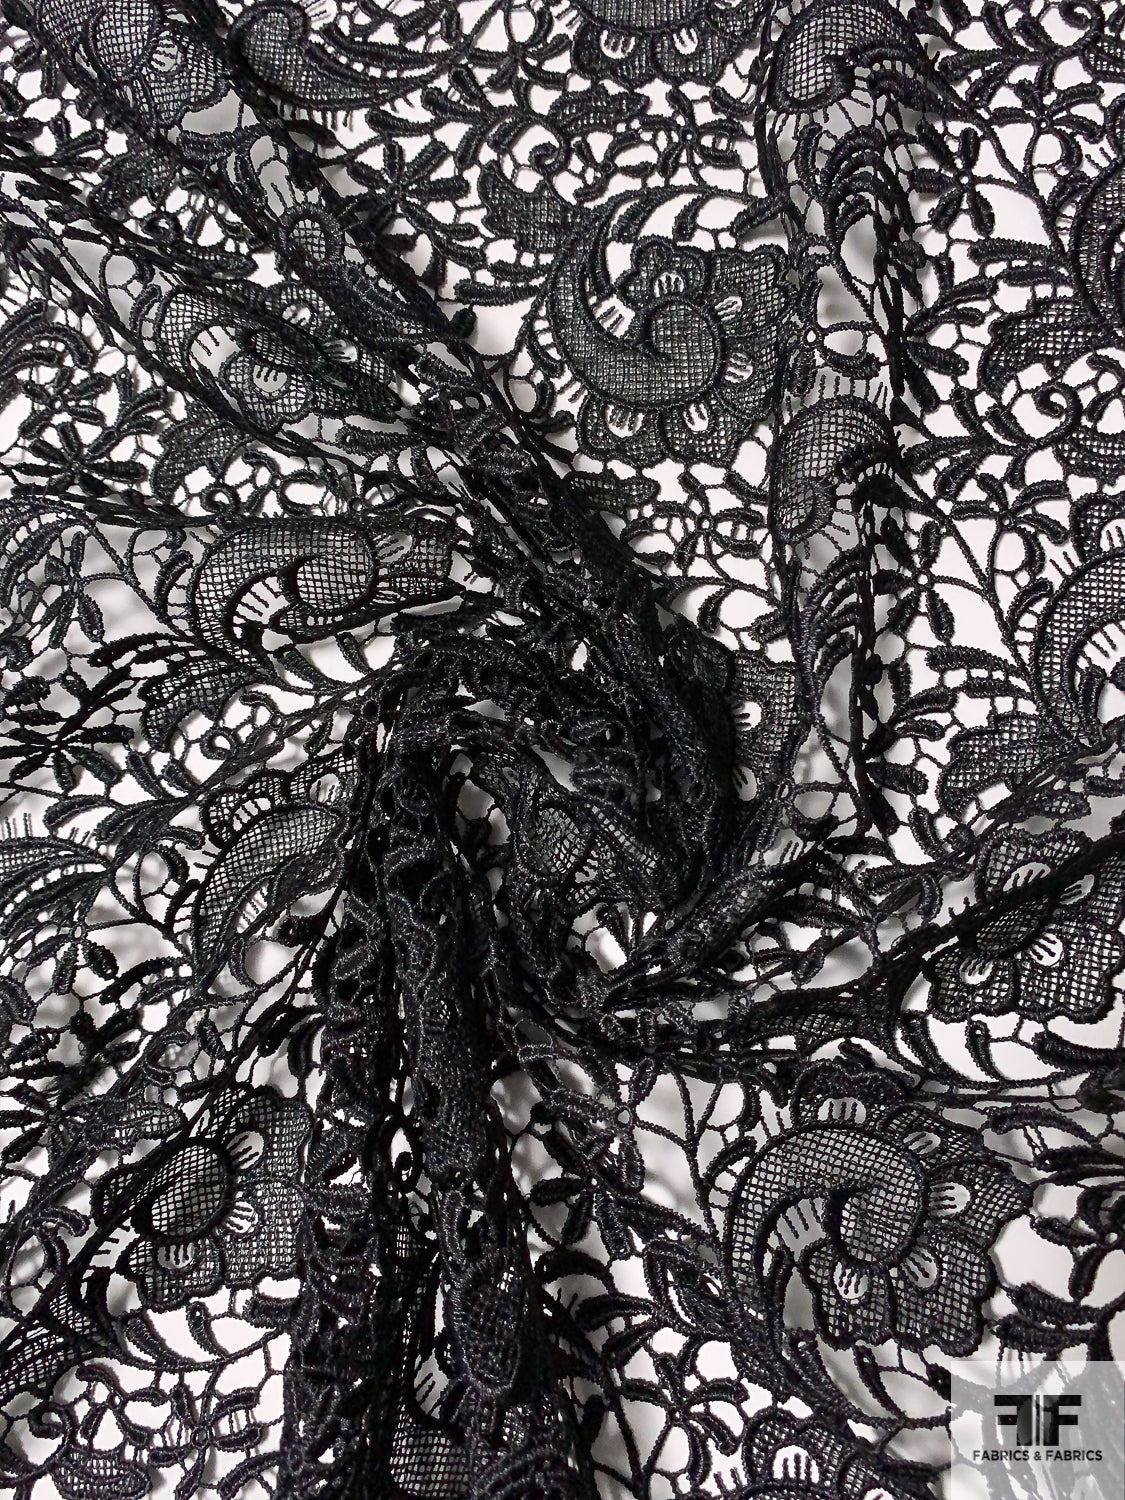 Floral Paisley Guipure Lace - Black - Fabric by the Yard